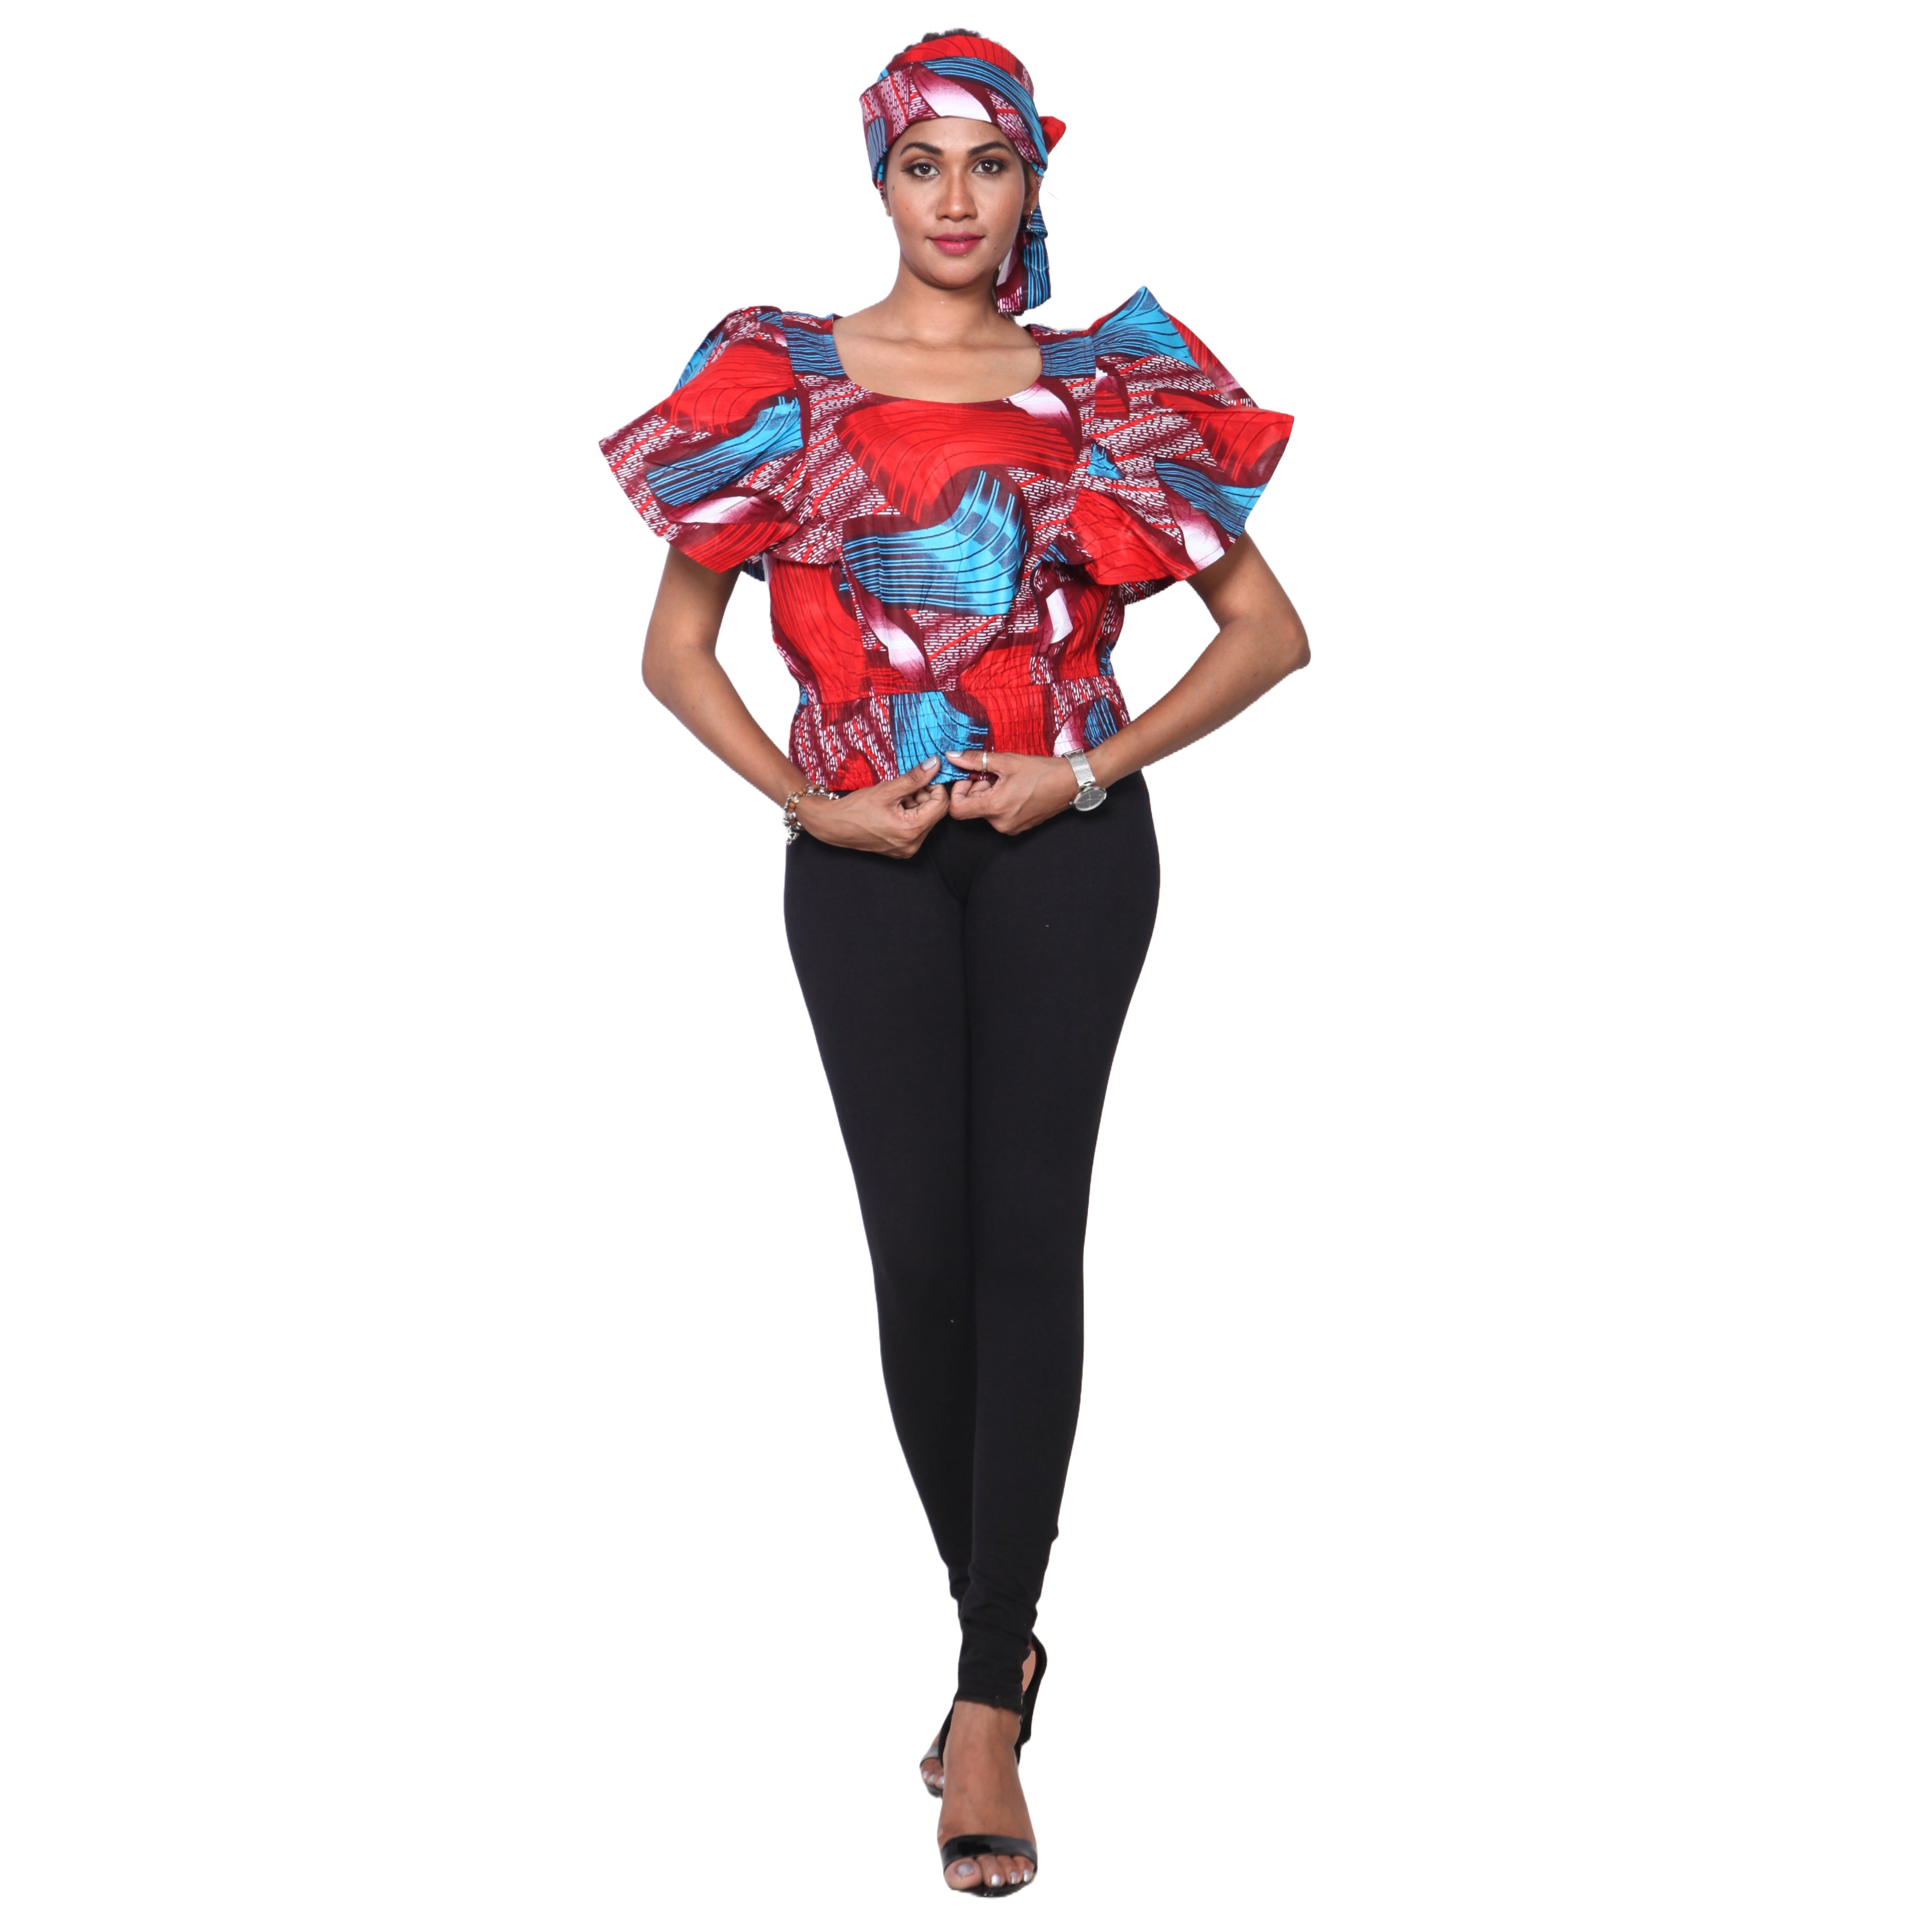 Women's African Print Short Sleeve Top red and blue contrast